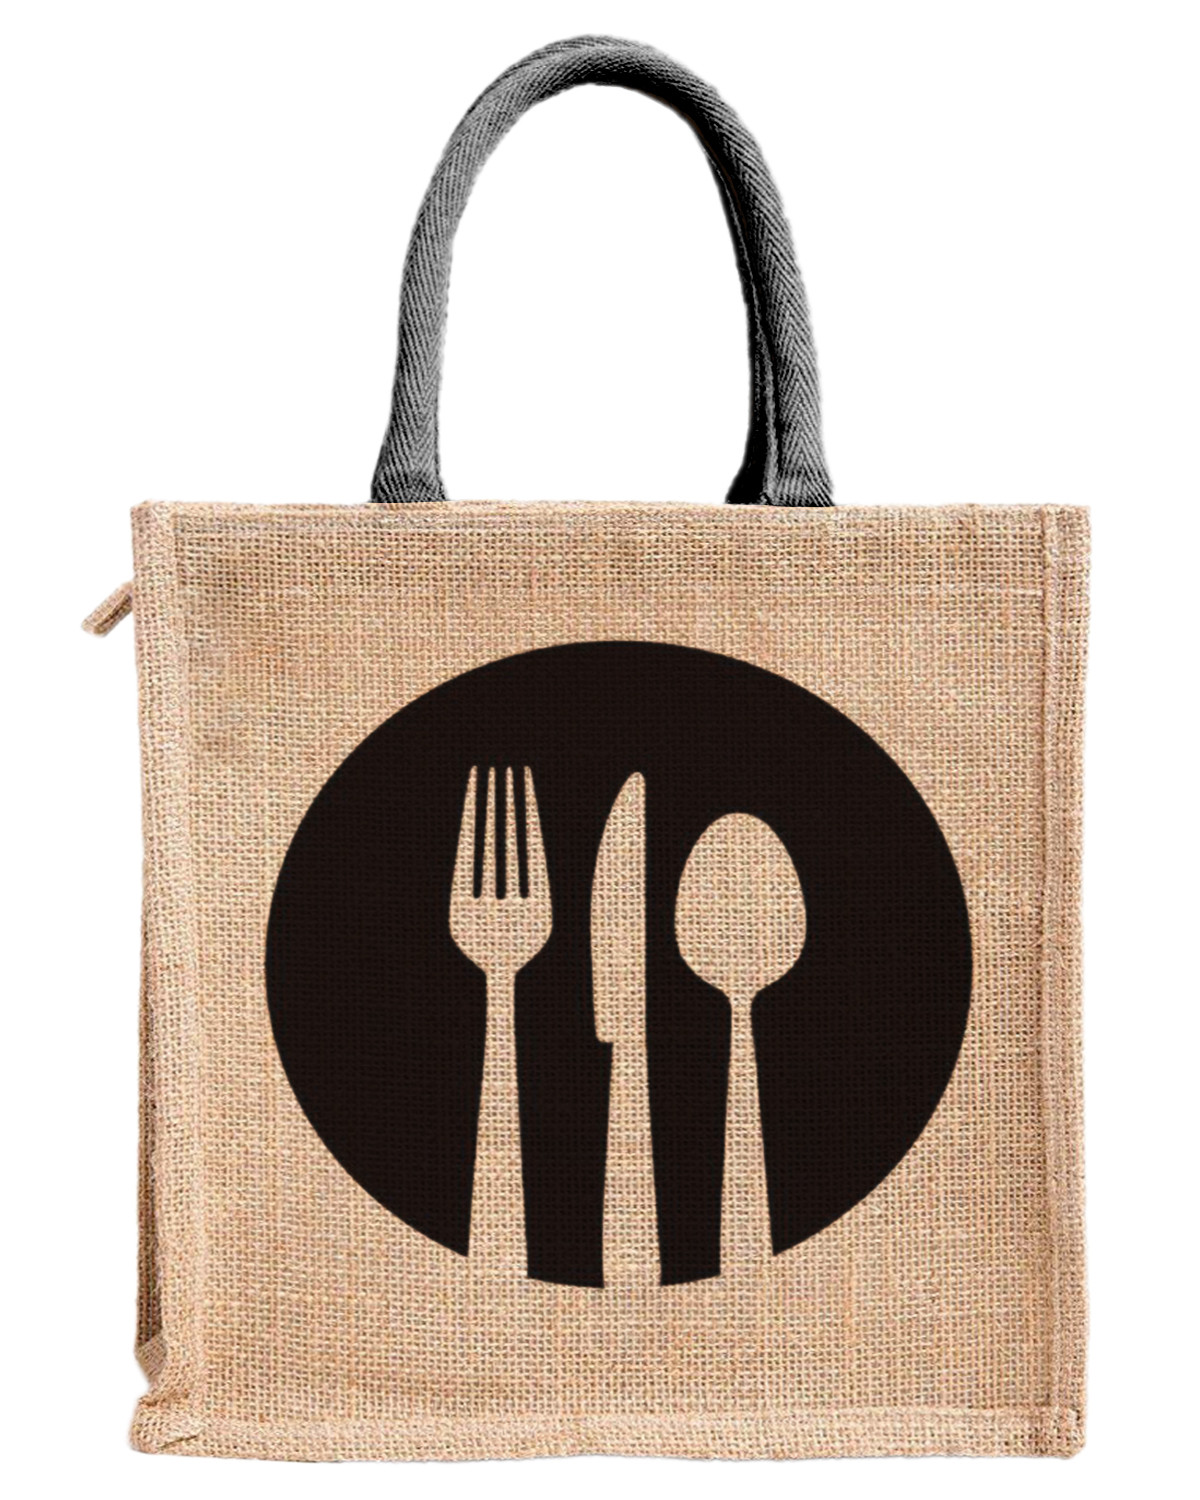 Kuber Industries Fork Knife Print Jute Reusable Eco-Friendly Hand Bag/Grocery Bag For Man, Woman With Handle (Black) 54KM4355